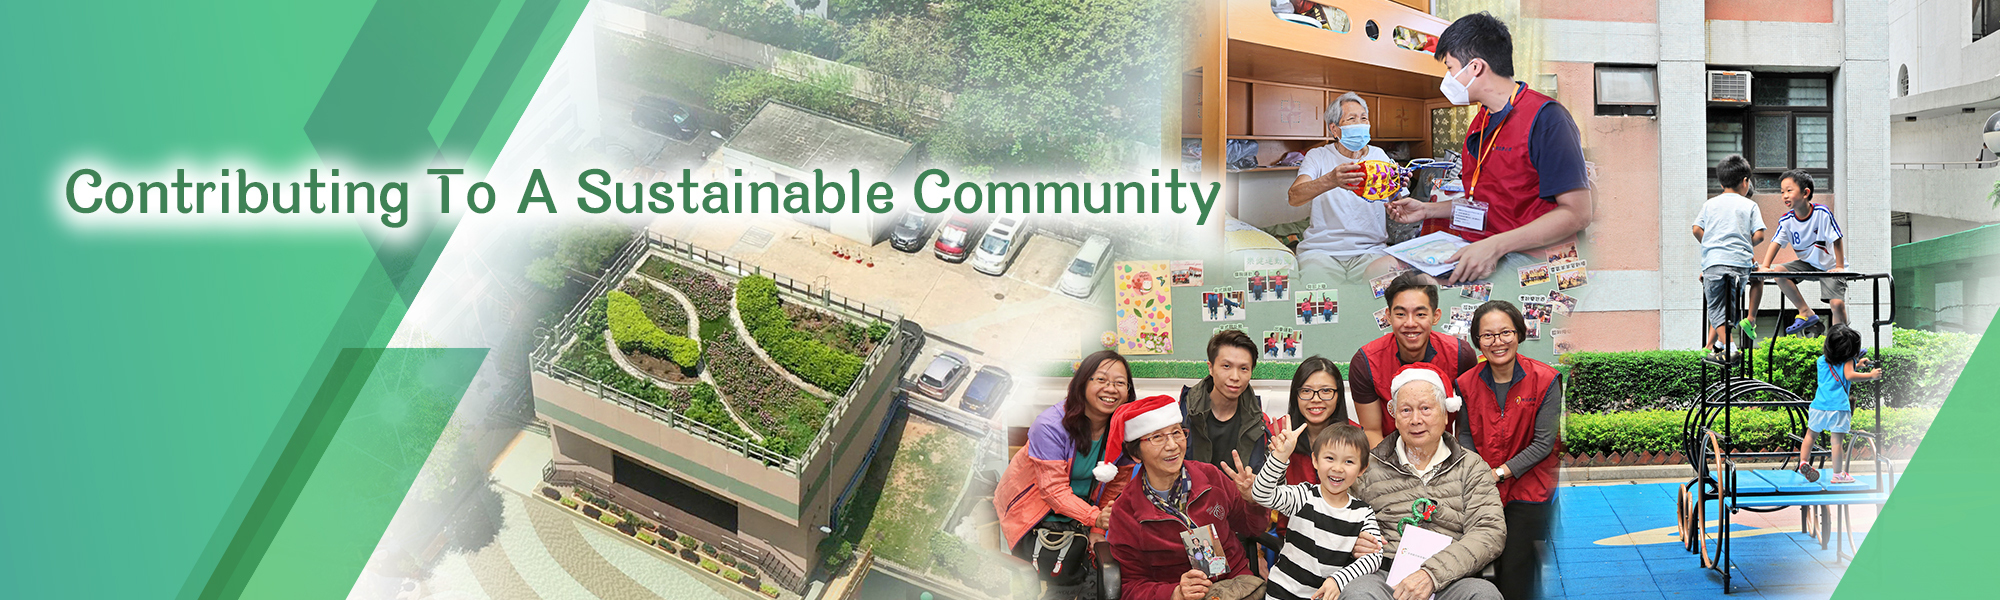 Contributing to a Sustainable Communi